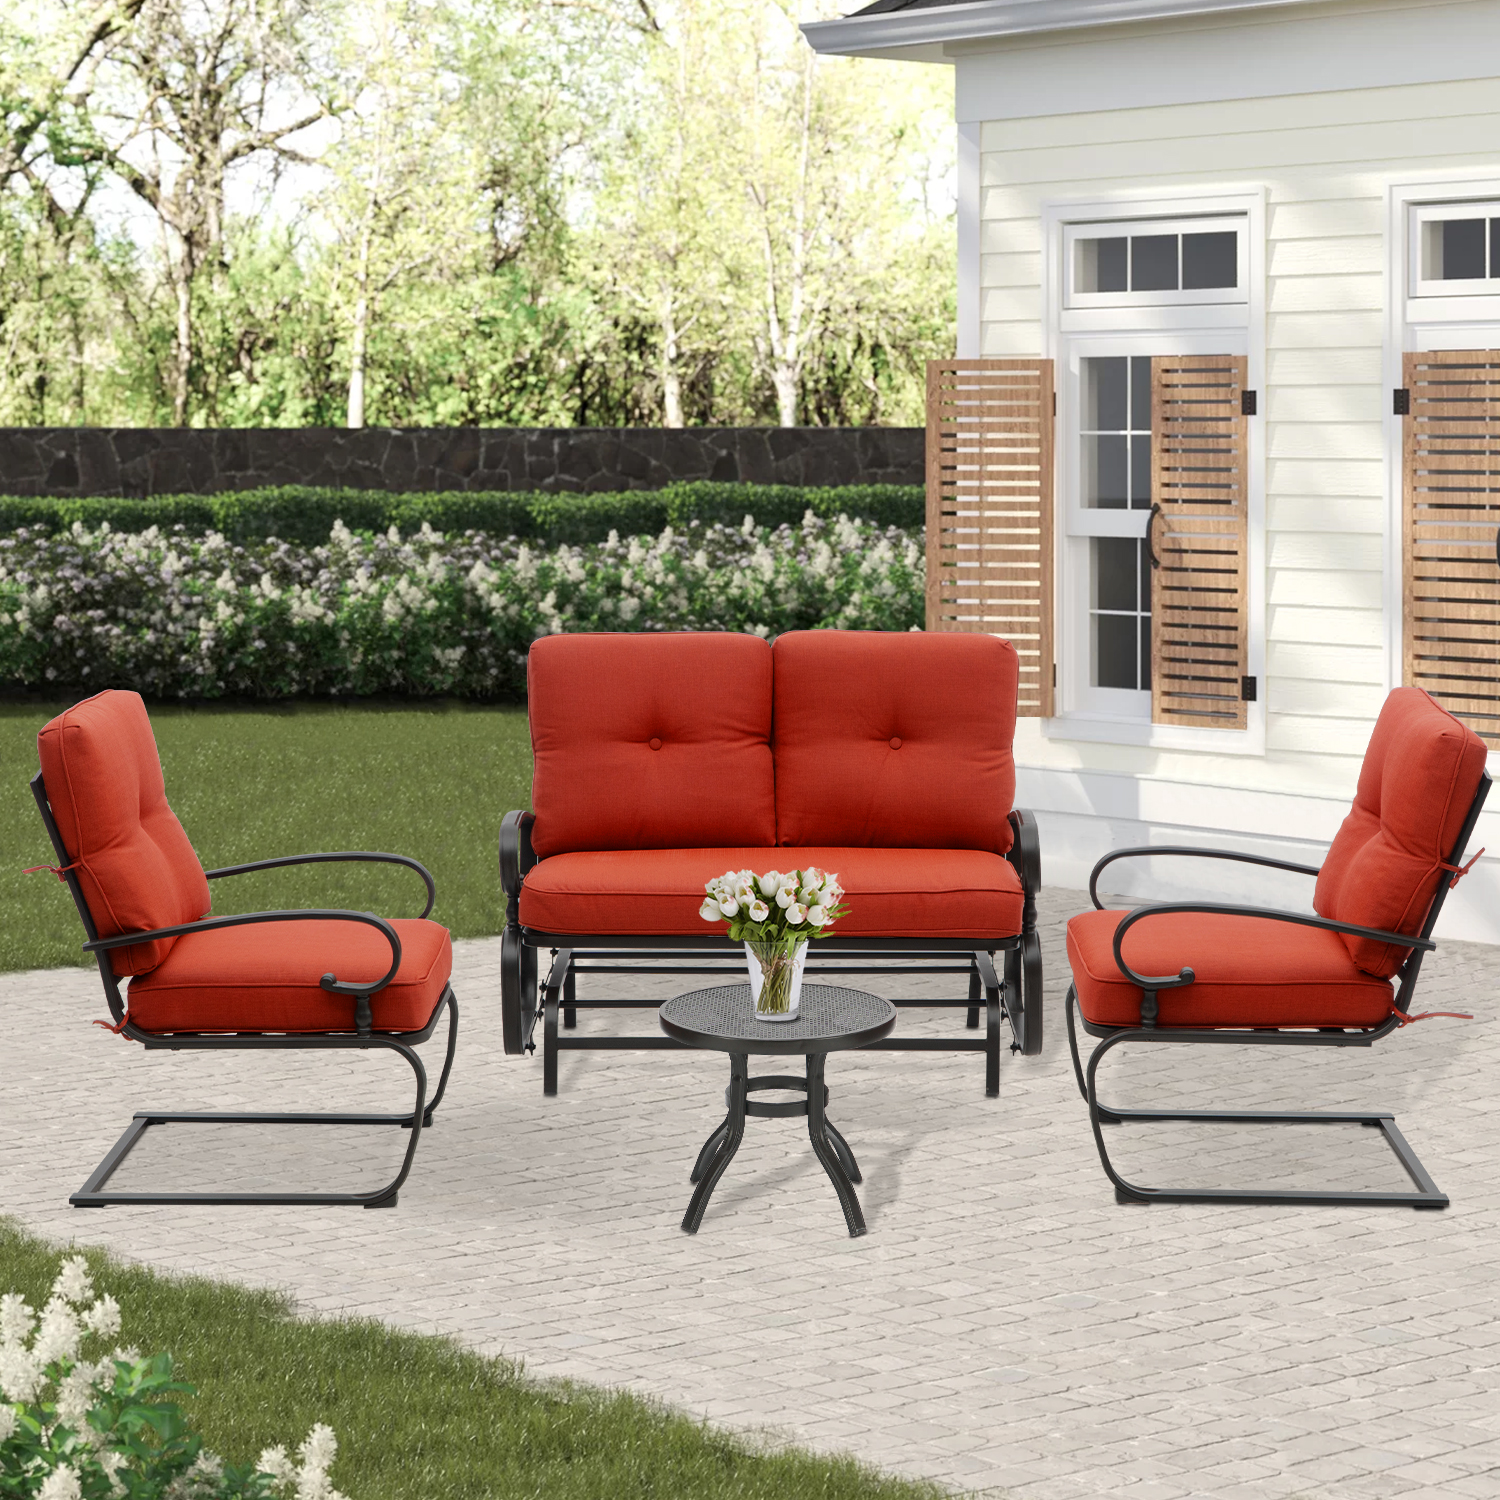 SUNCROWN 4-Piece Outdoor Patio Furniture Set Wrought Iron Conversation Sets, Red - image 1 of 8